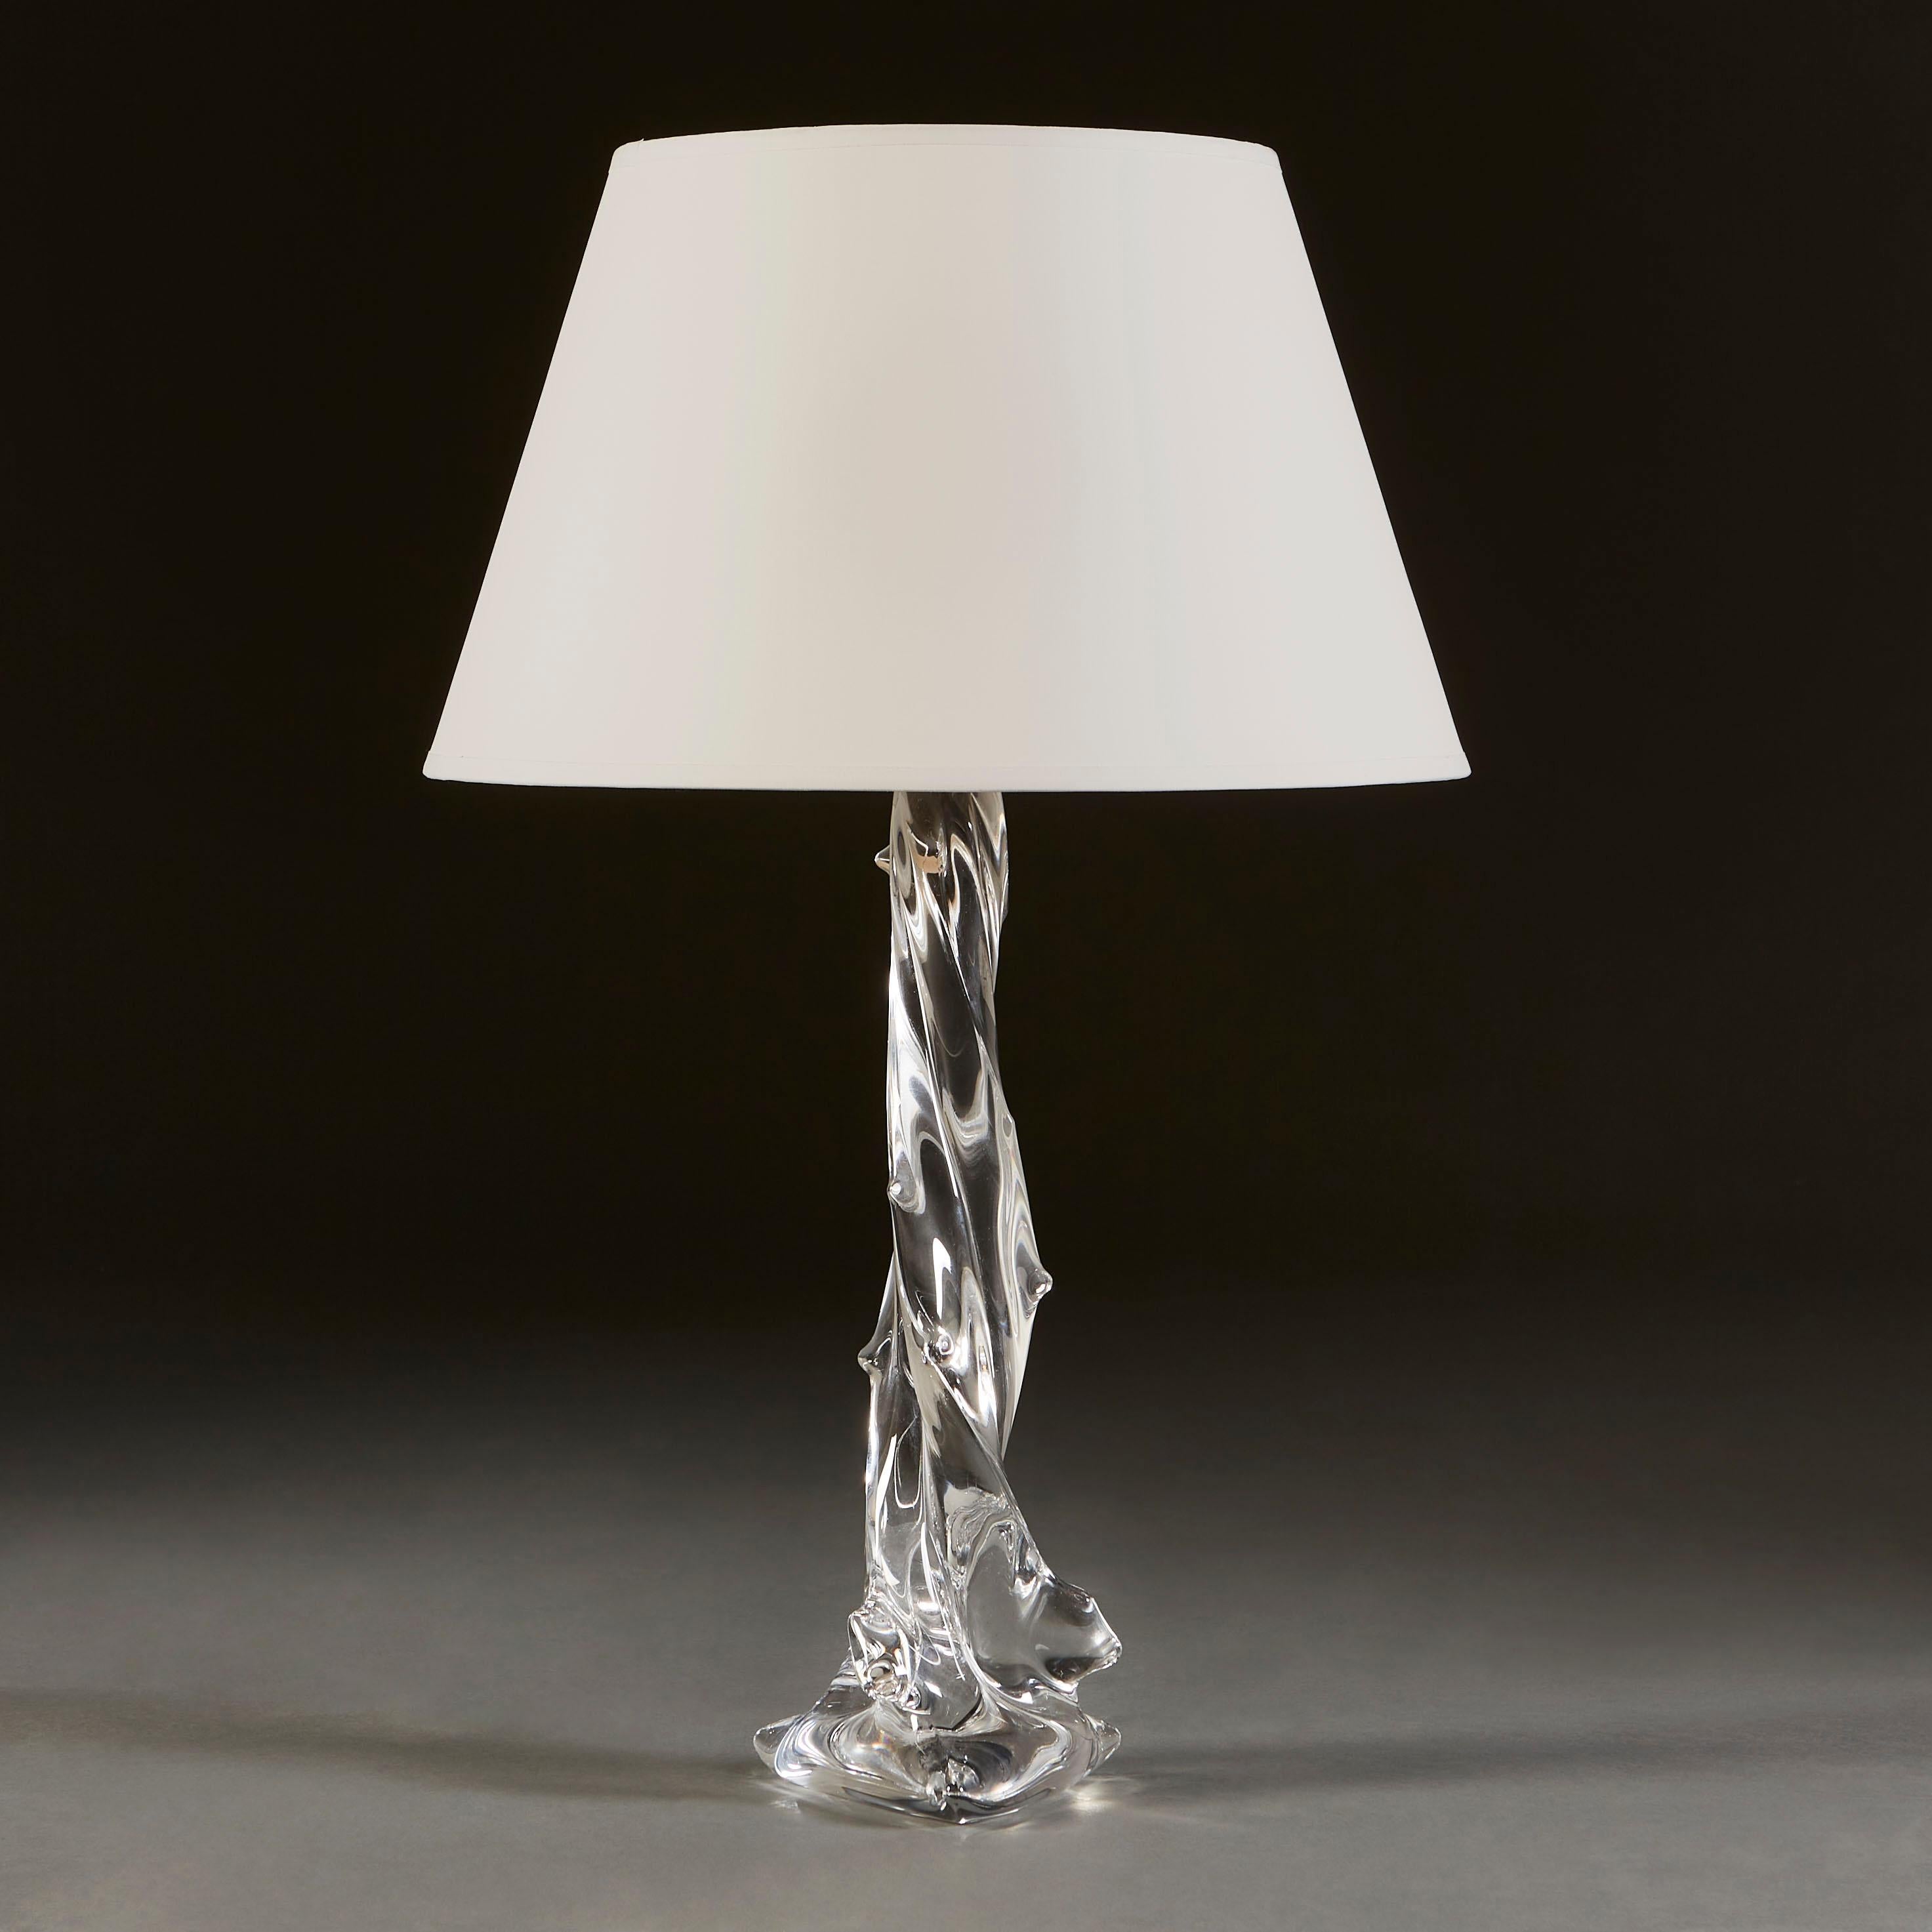 An unusual, large French art glass lamp, of irregular form with a triangular base, from which the glass twists upwards from the three outer points of the base, pulled into points along the upright. Attributed to Vannes.

Currently wired for the